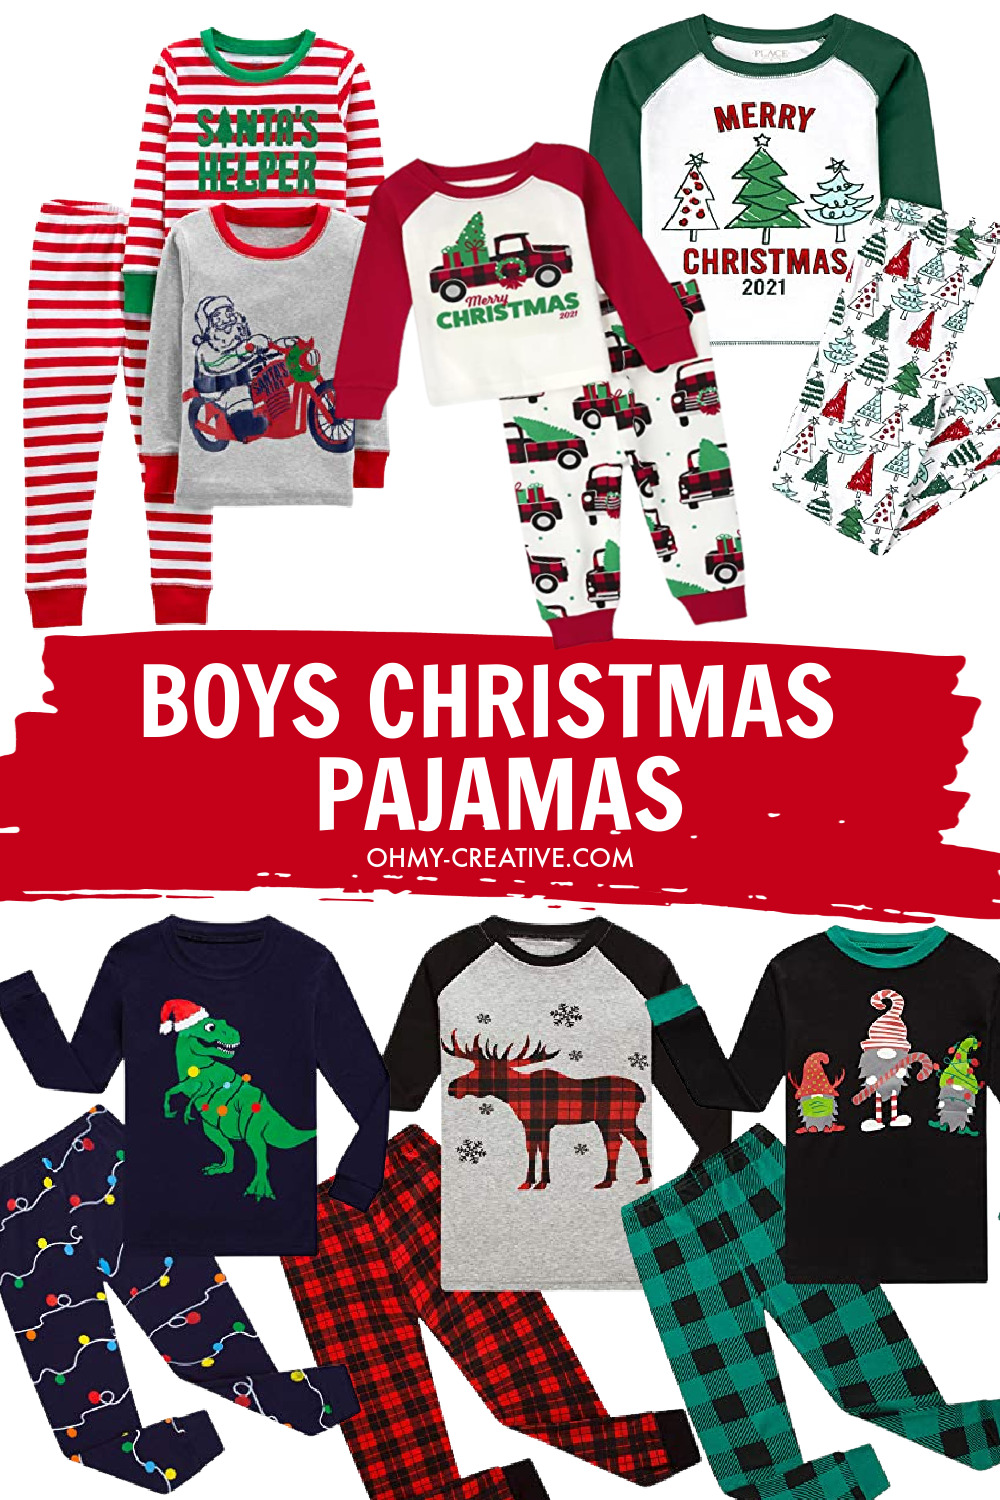 Collage of boys Christmas pajamas in different prints.